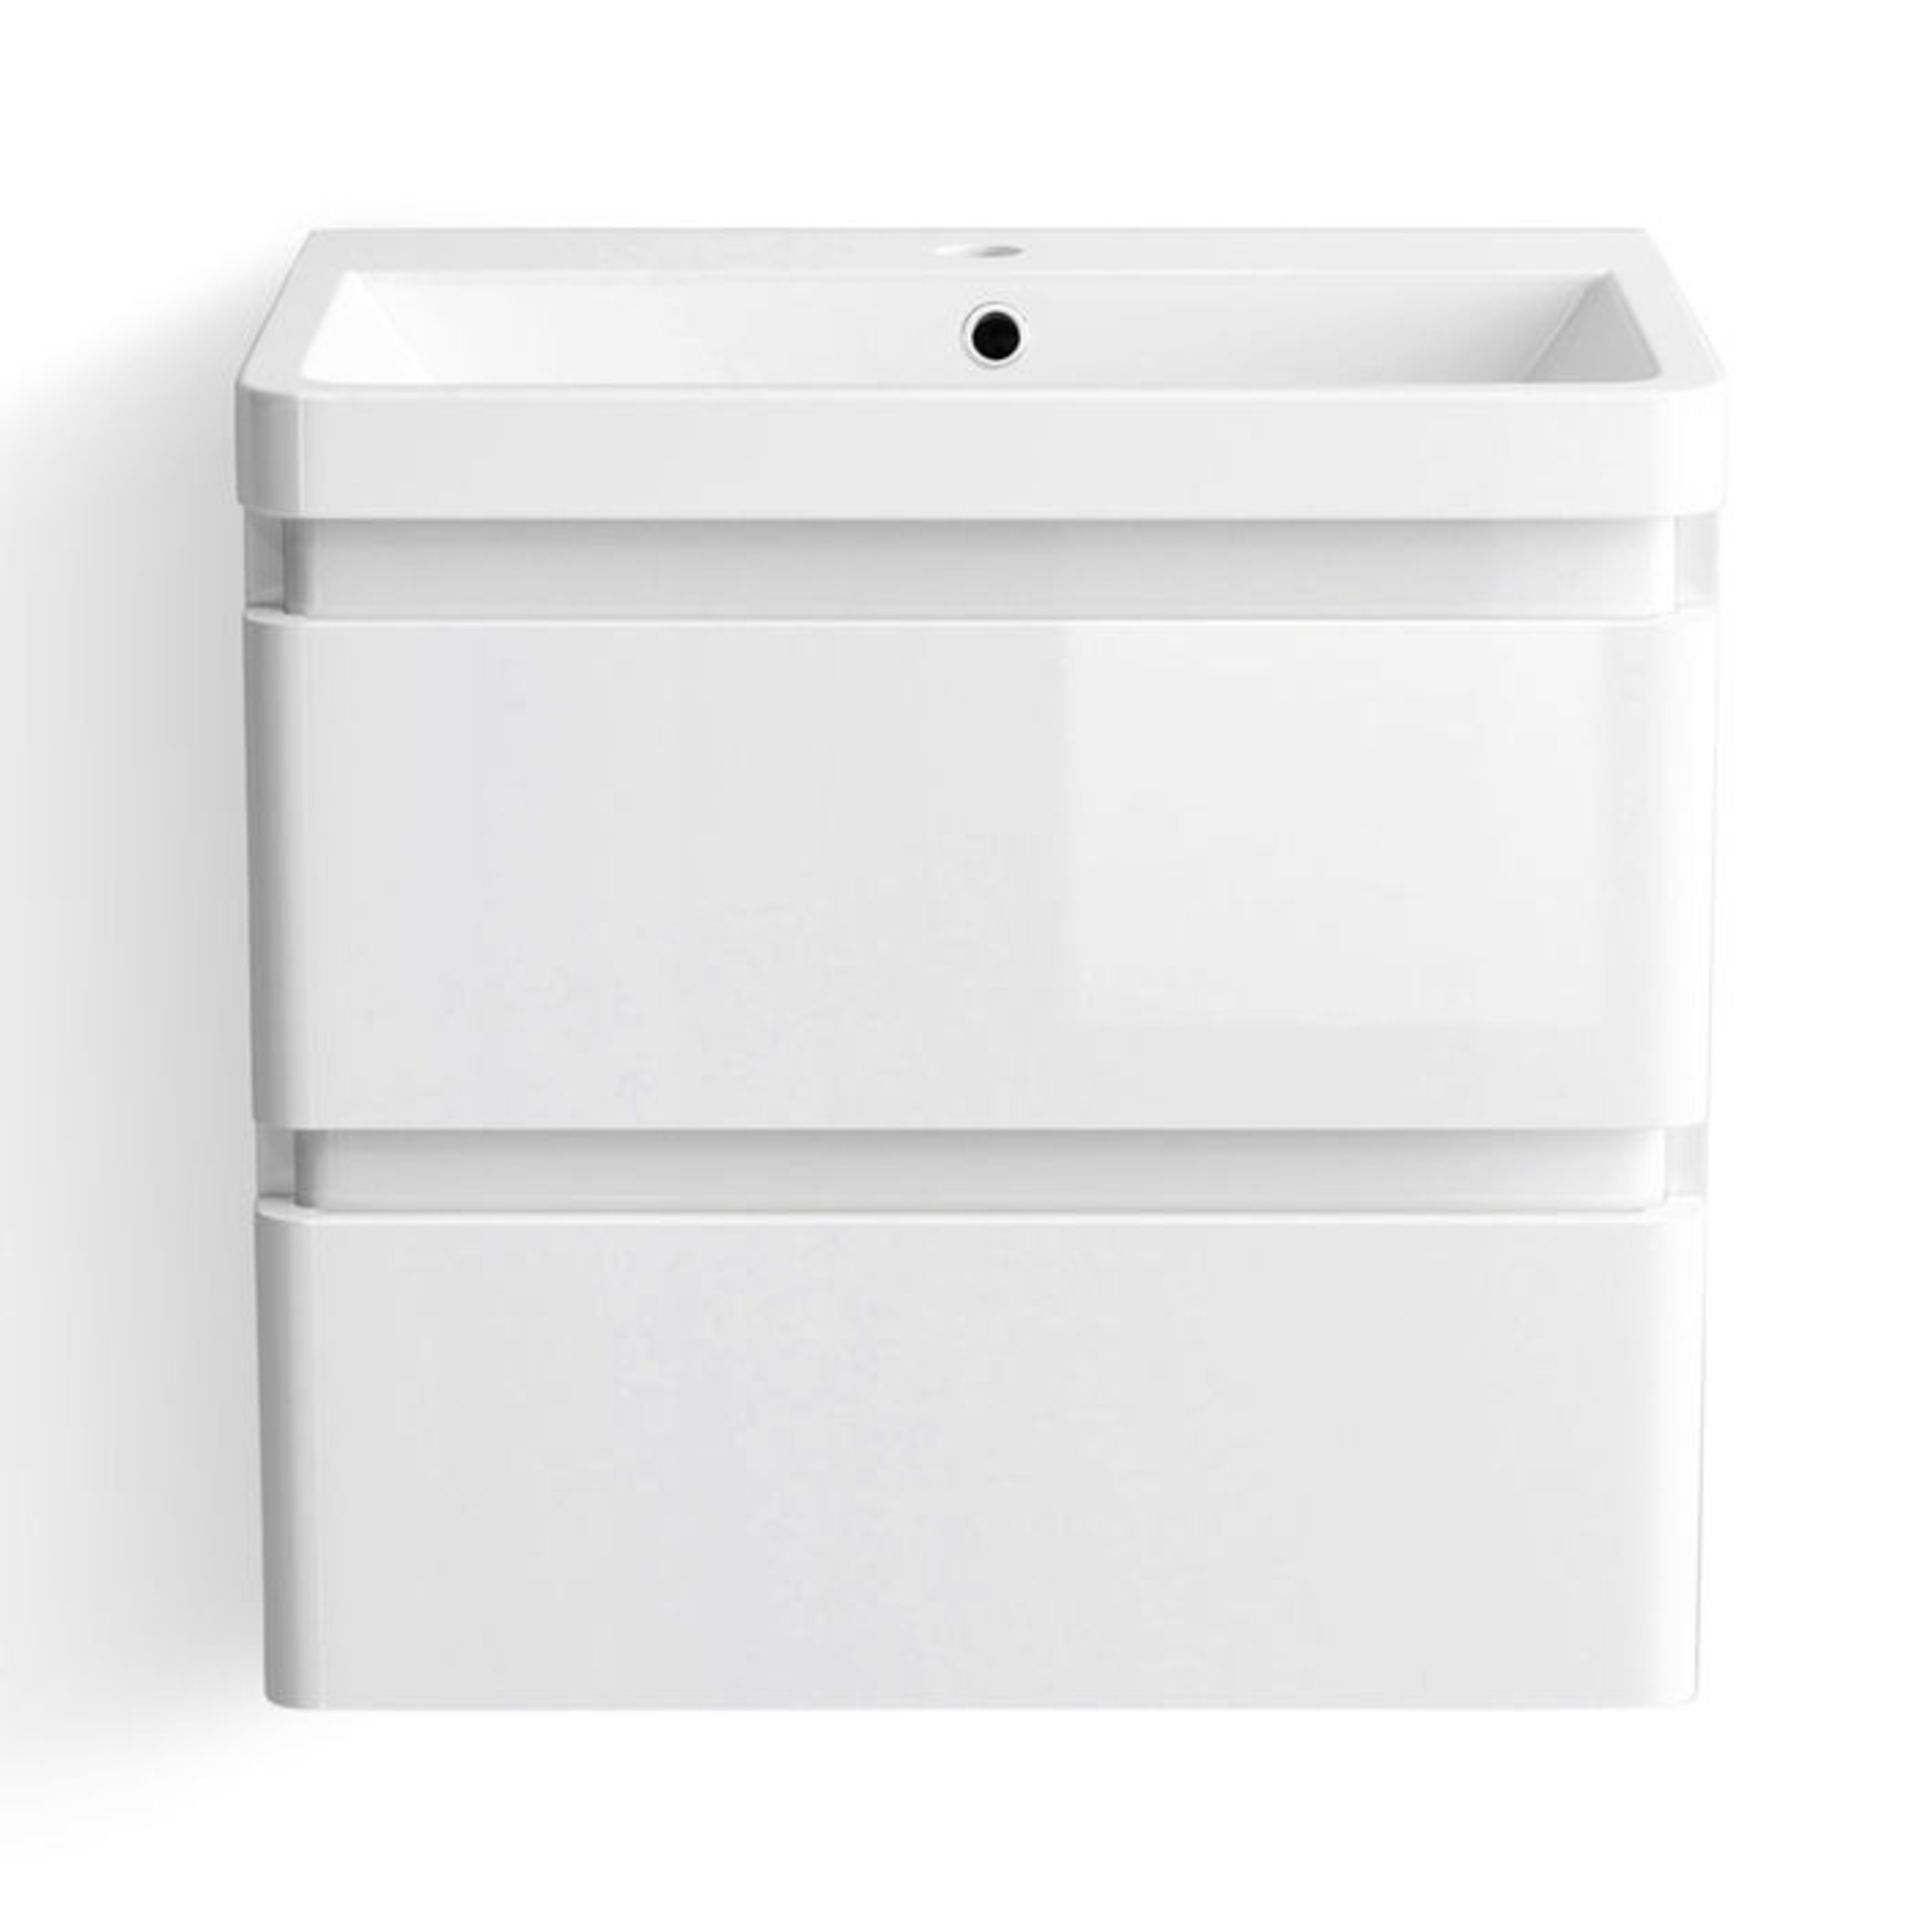 (SP40) 600mm Denver Gloss White Built In Basin Drawer Unit - Wall Hung. RRP £499.99. Comes - Image 5 of 5